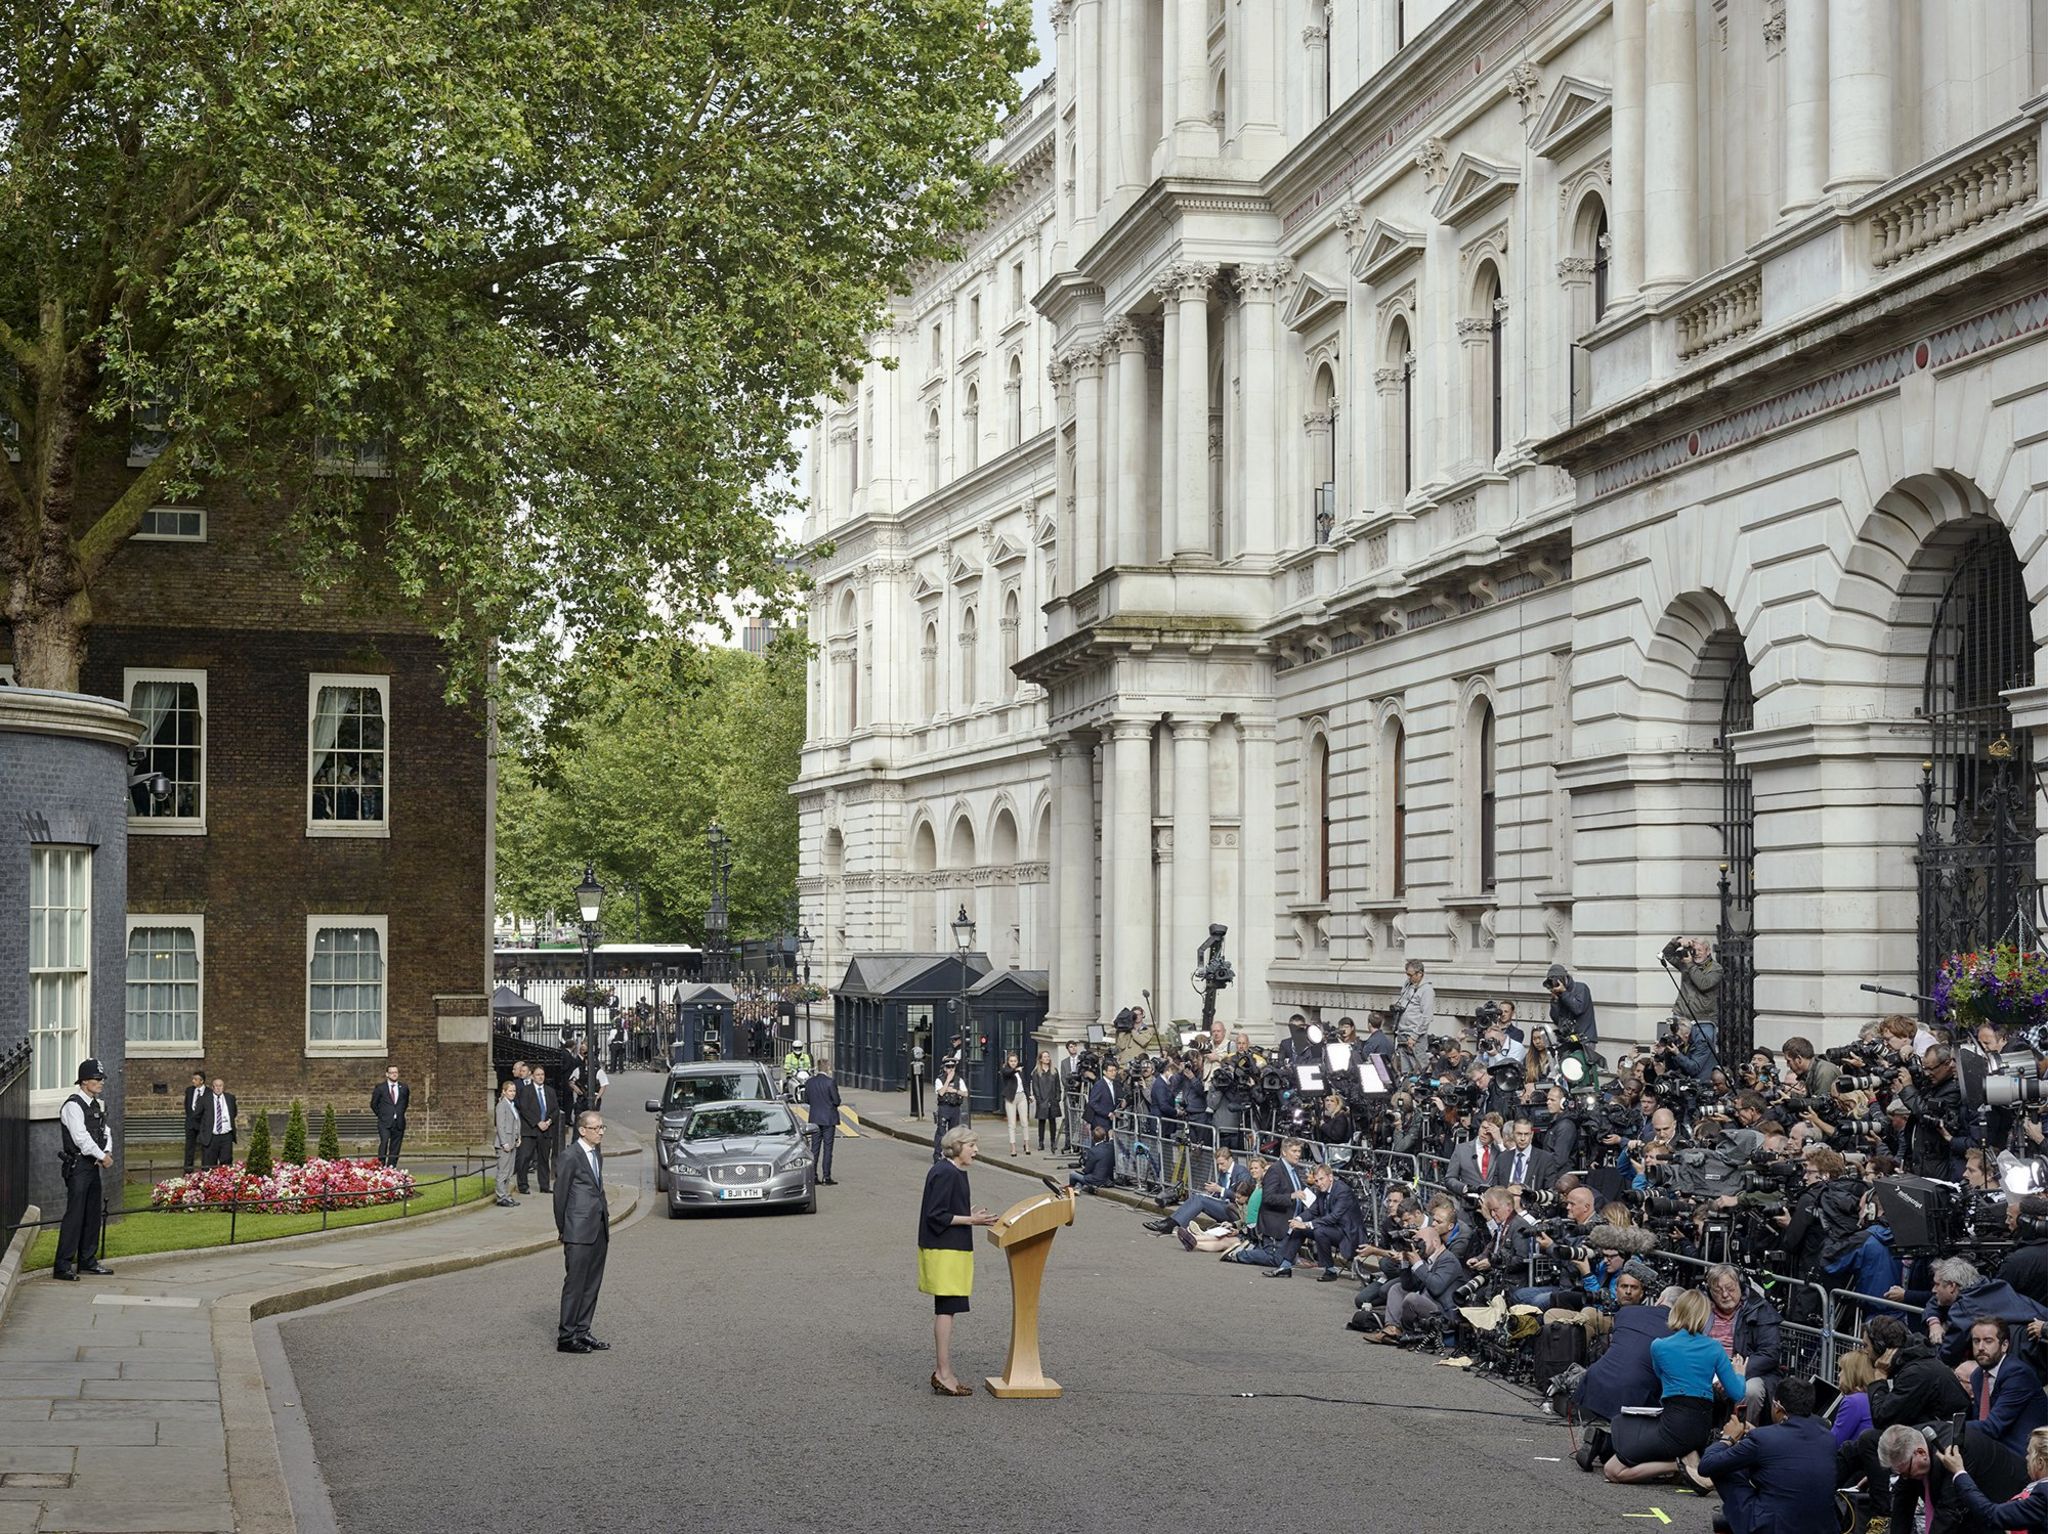 Prime Minister Theresa May, Downing Street, London, 13 July 2016